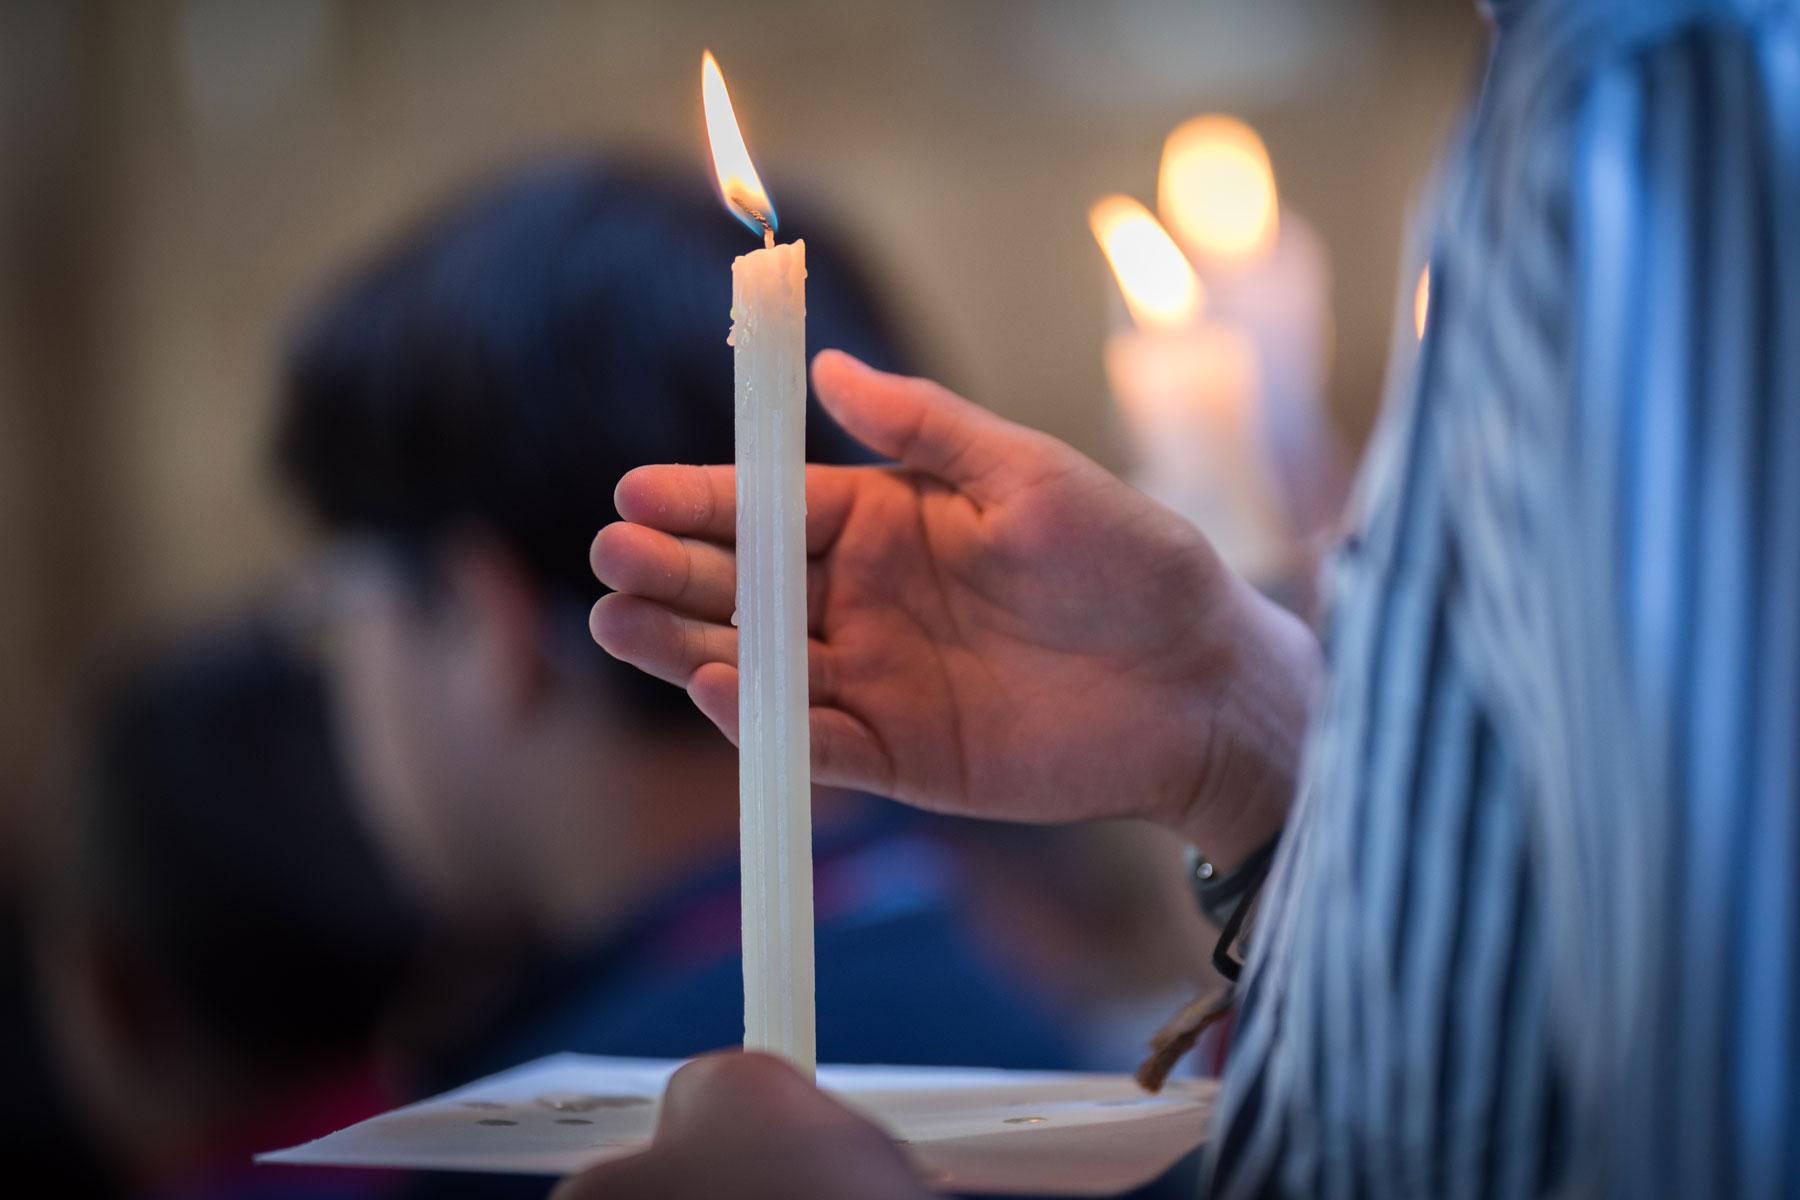 Candle lighting during a church service. Photo: LWF/Albin Hillert